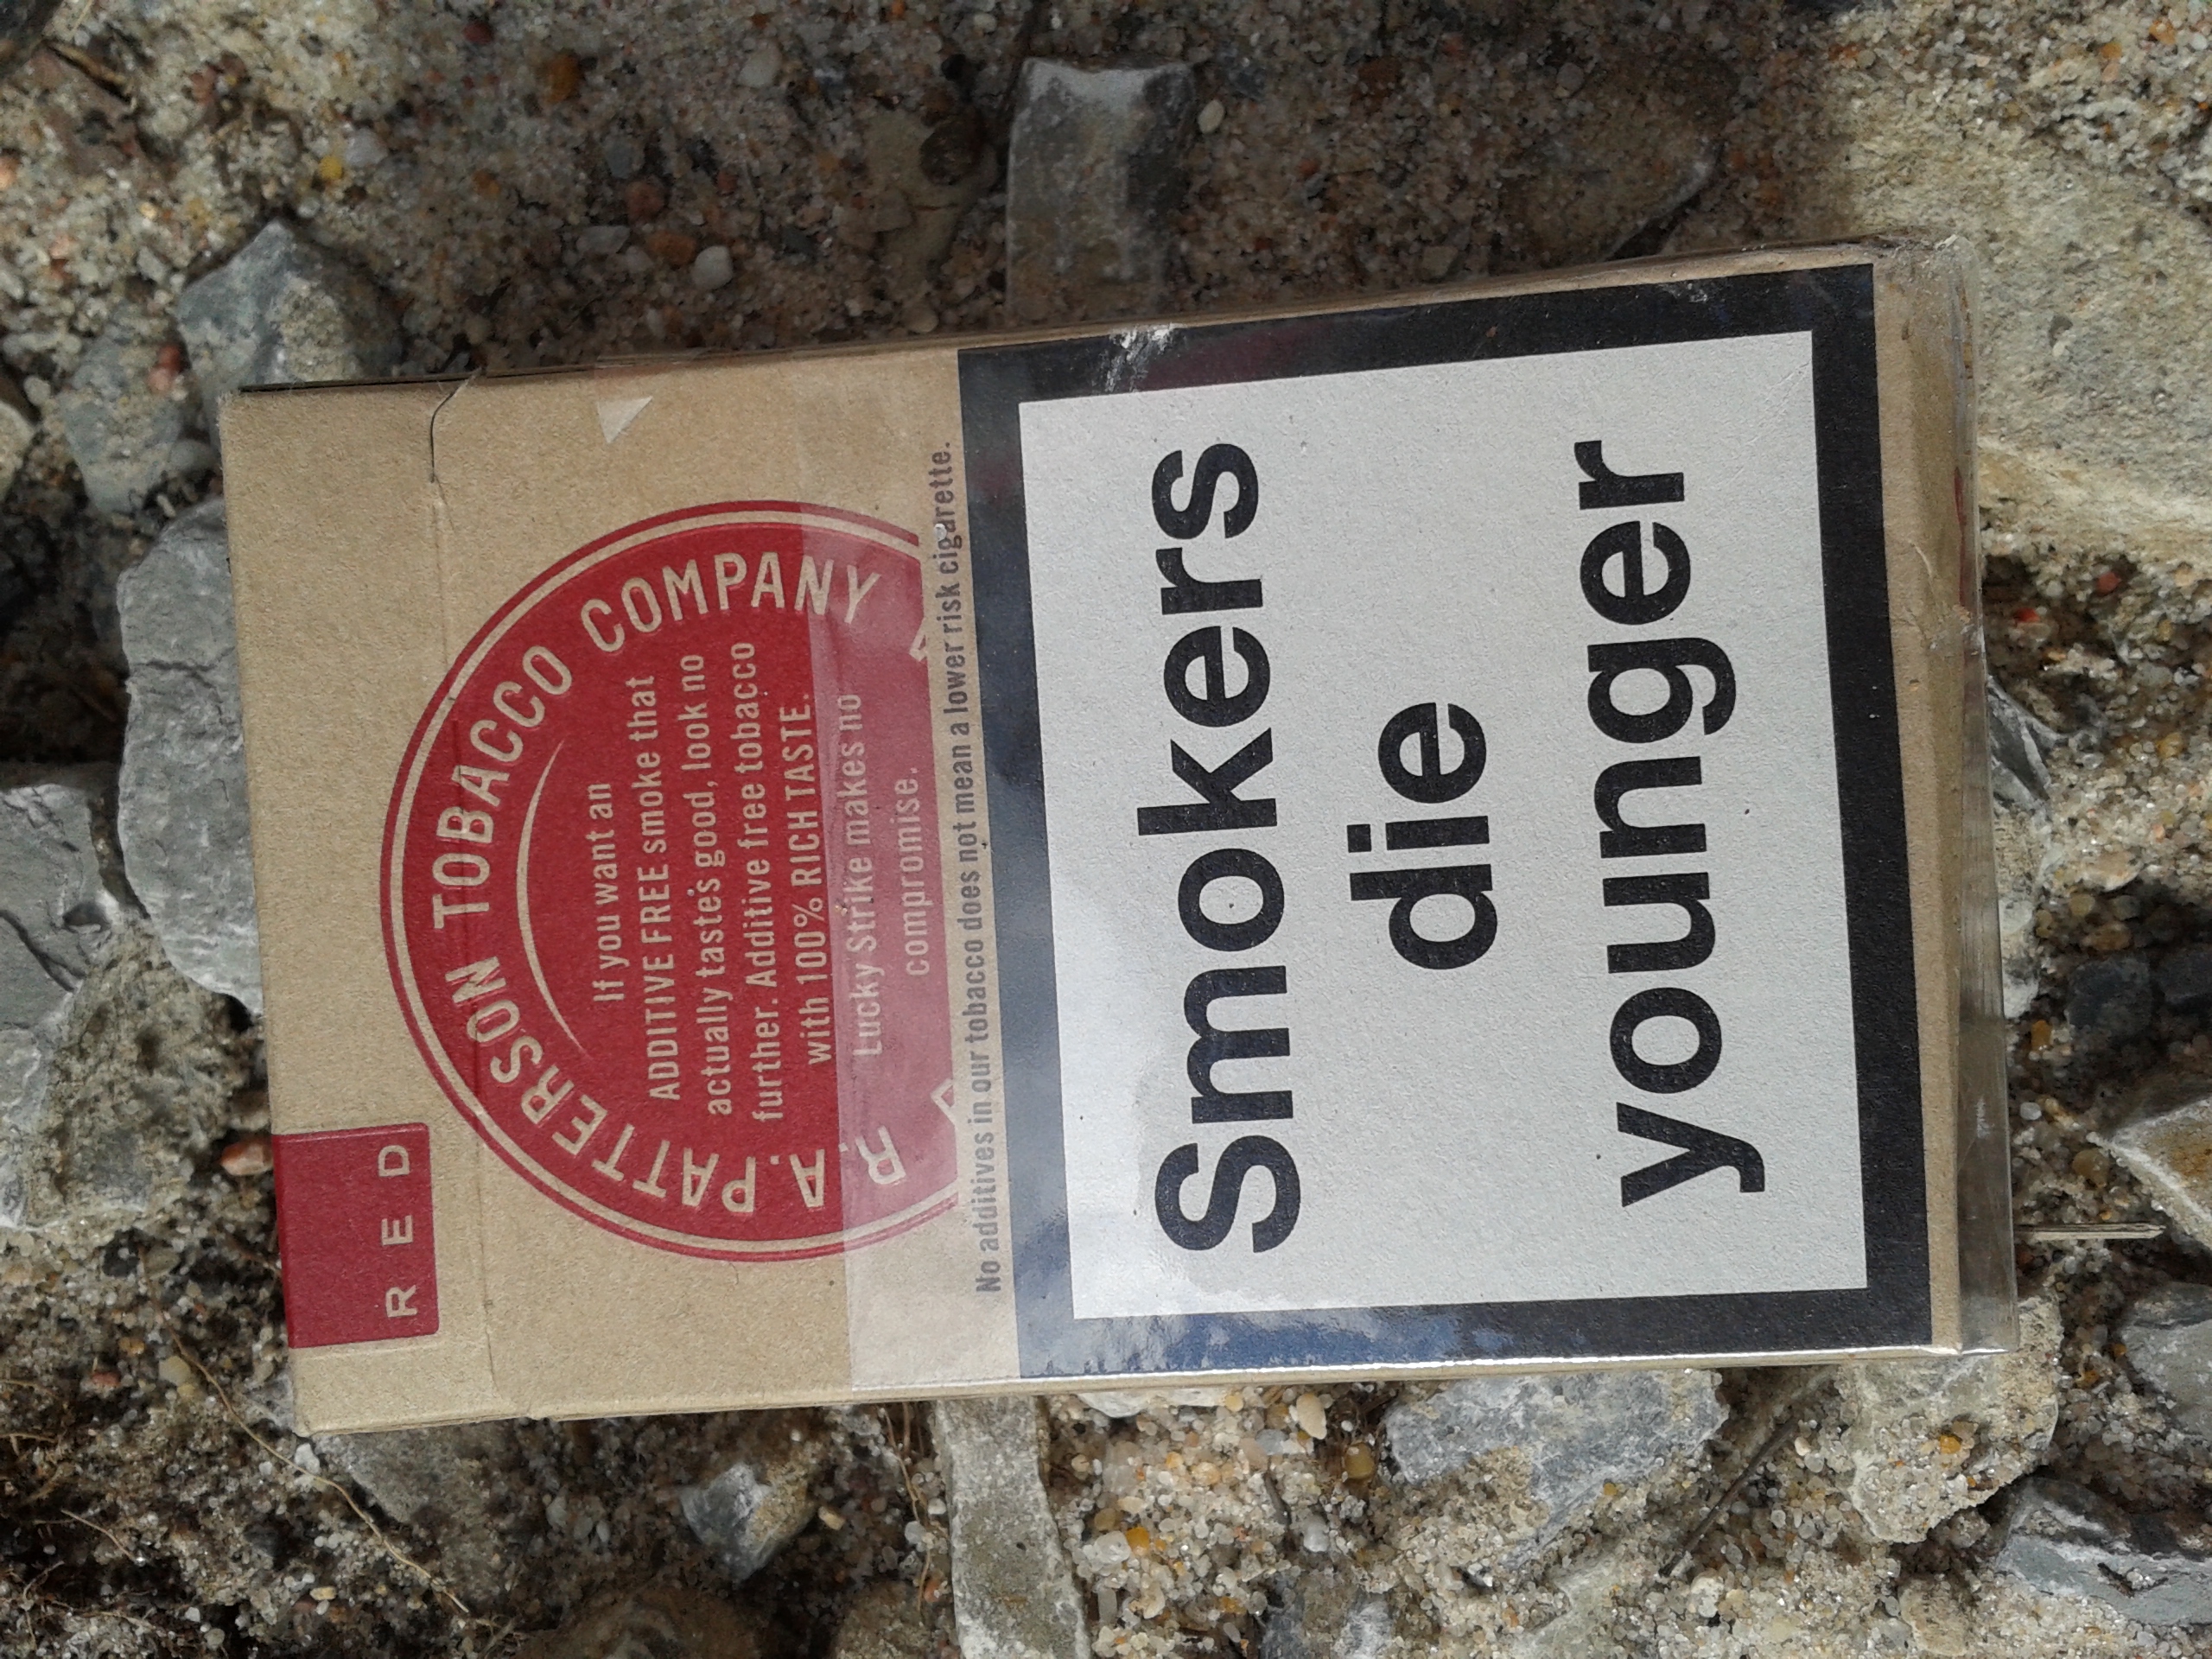 Smokers die younger